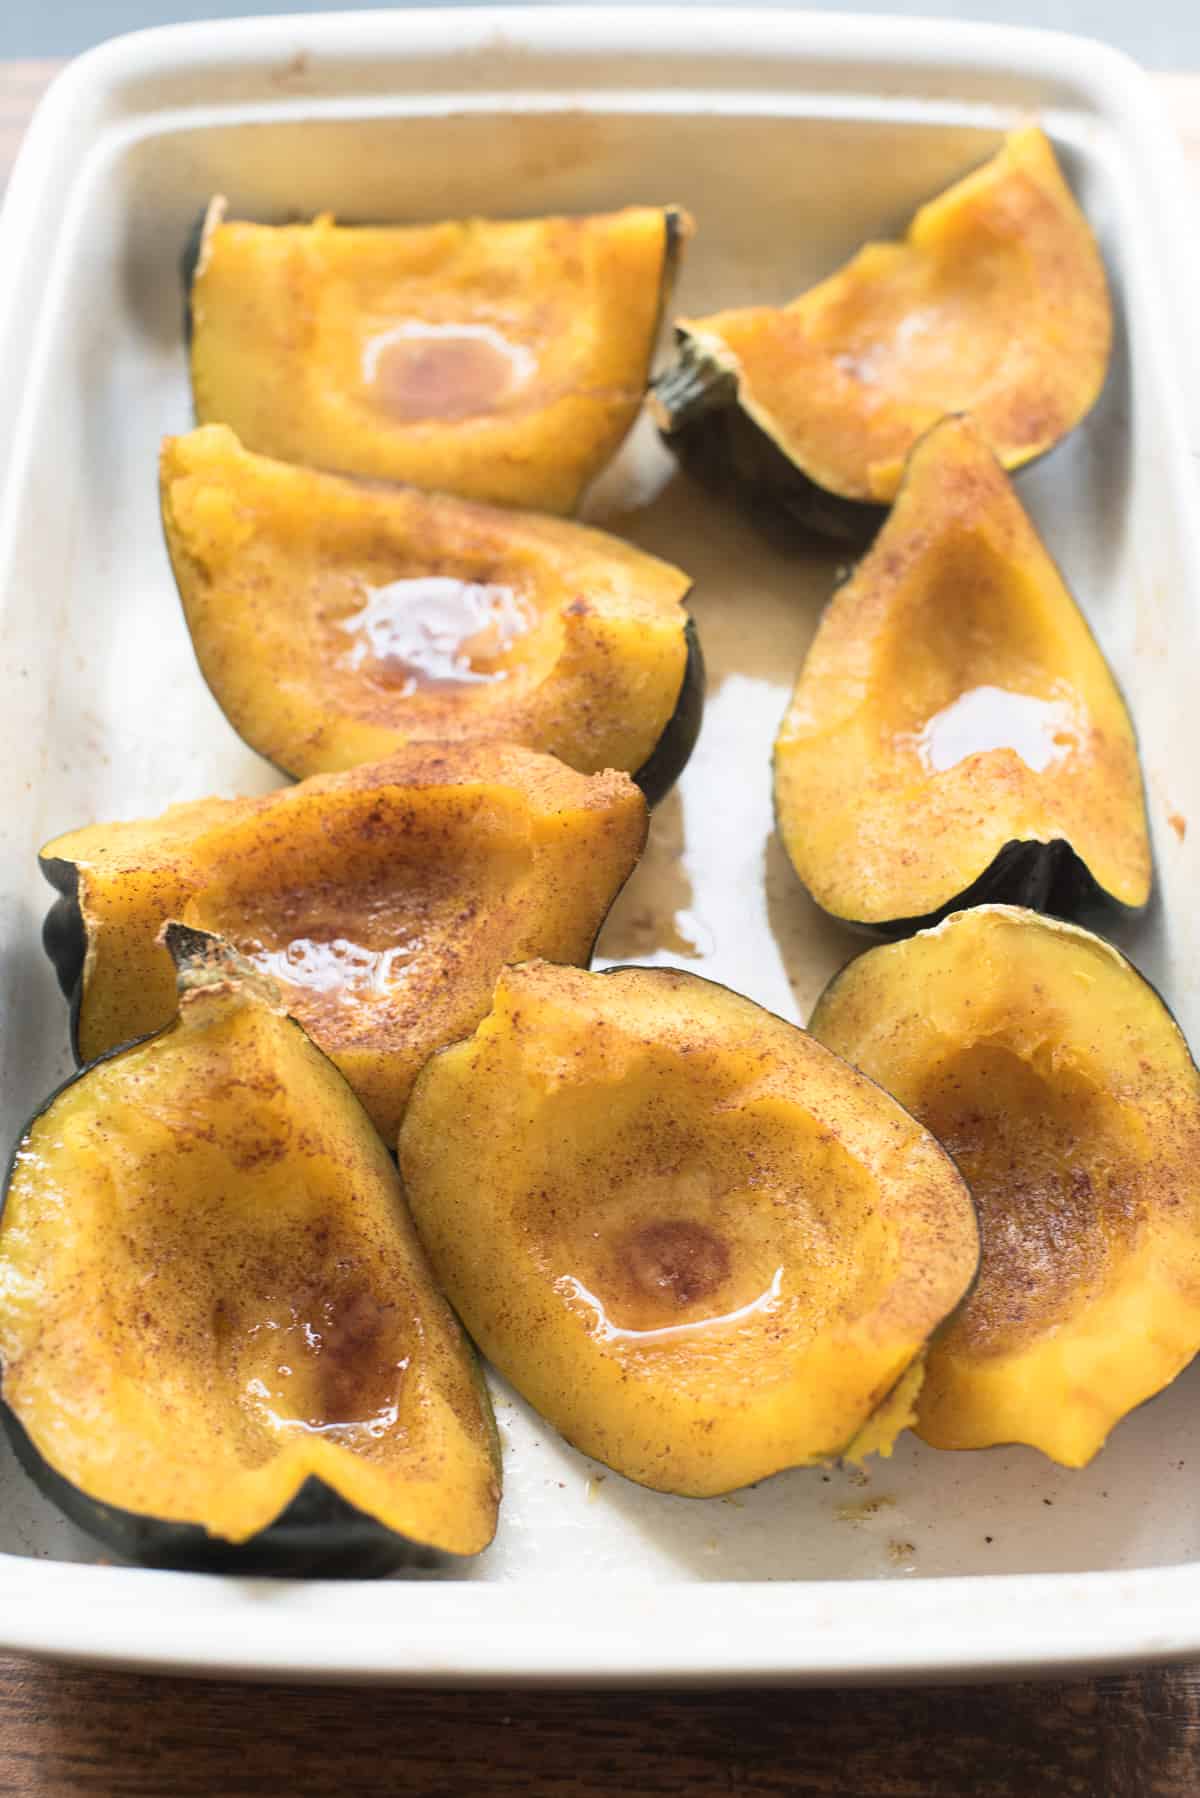 Baked acorn squash with brown sugar and butter in a white baking dish.